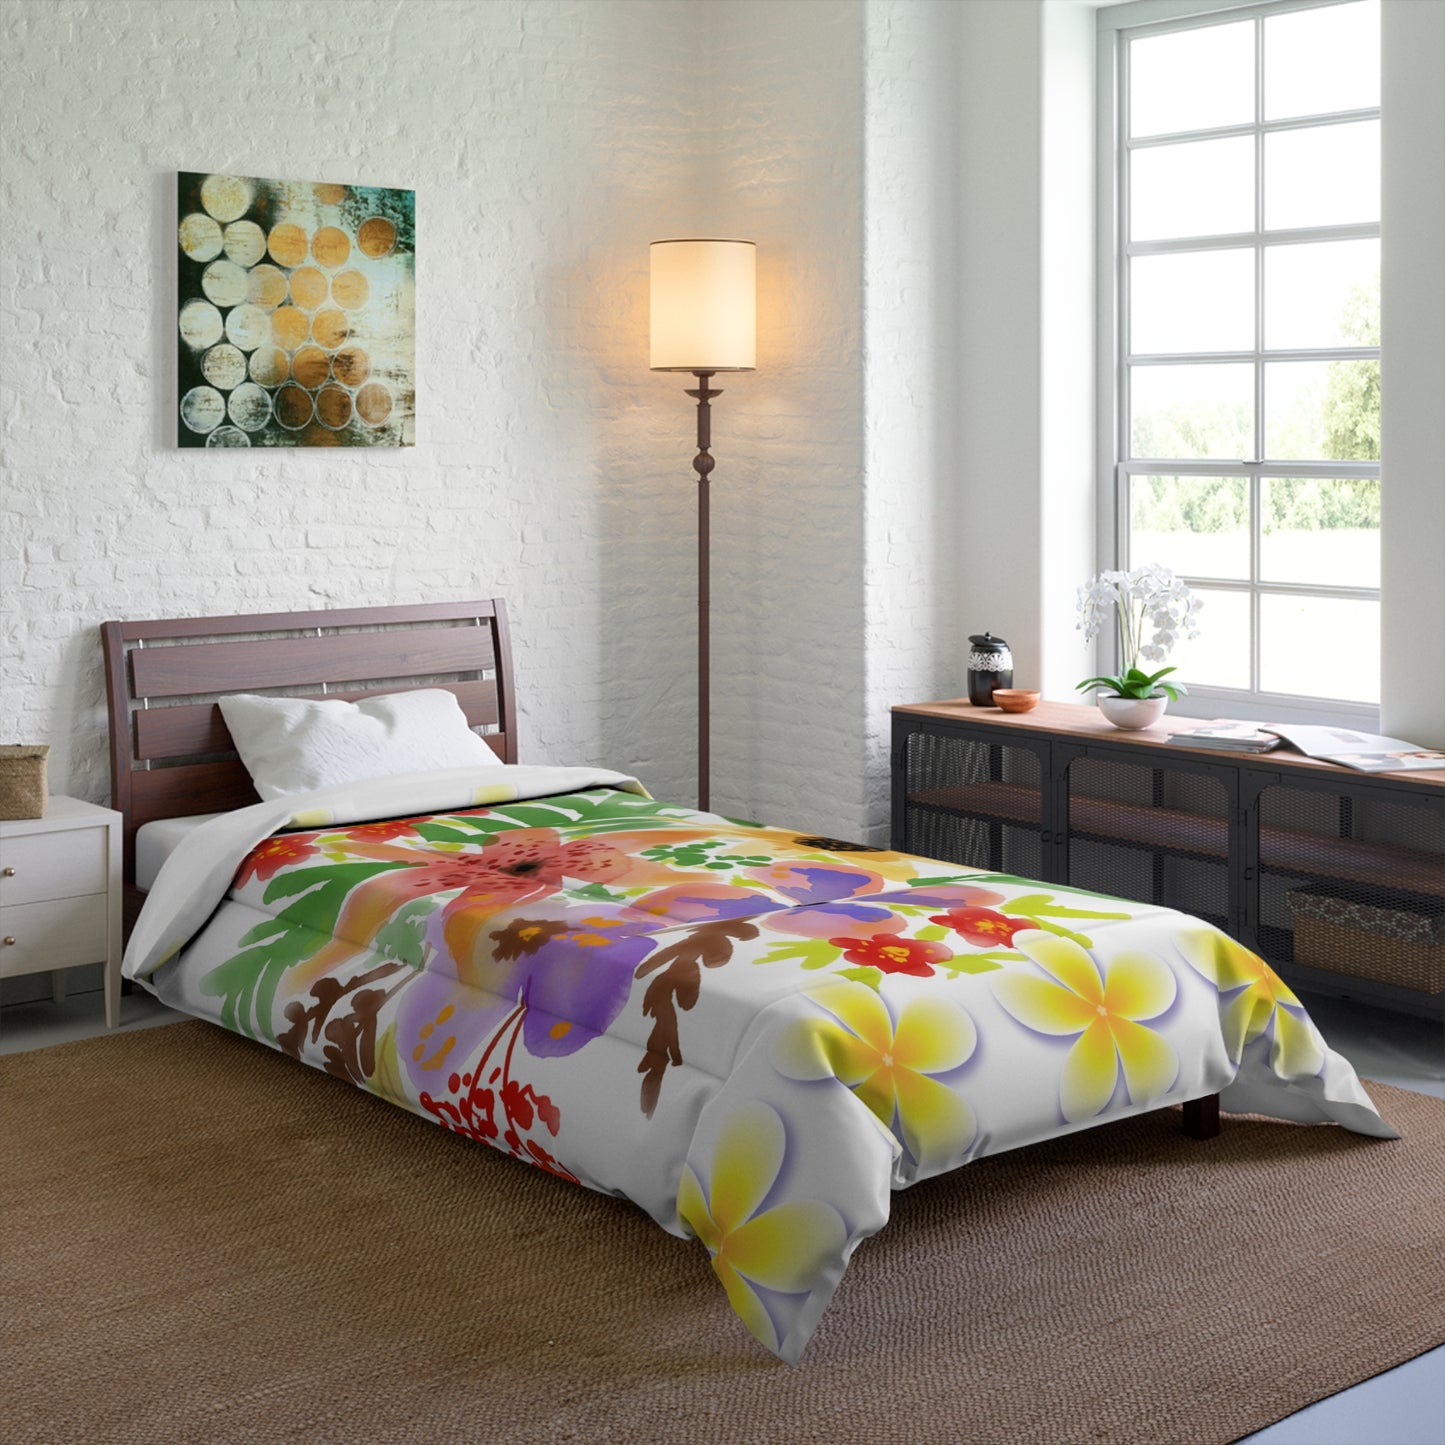 The Ultimate Doona Blanket Comforter - with Flower and frangipani edges